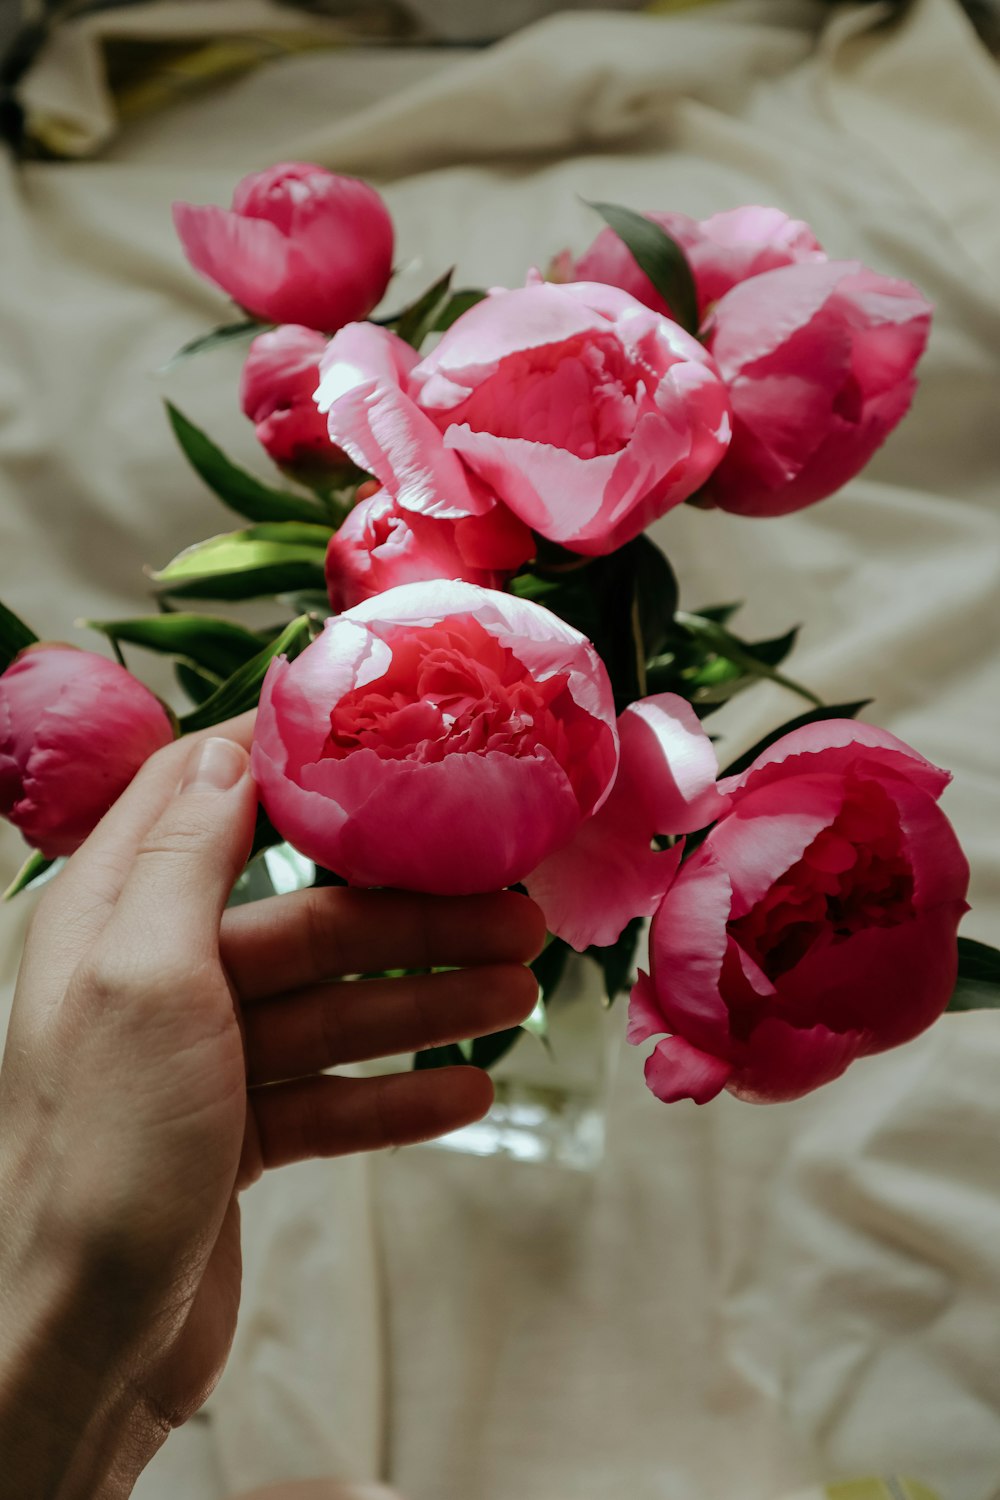 person holding pink flower bouquet